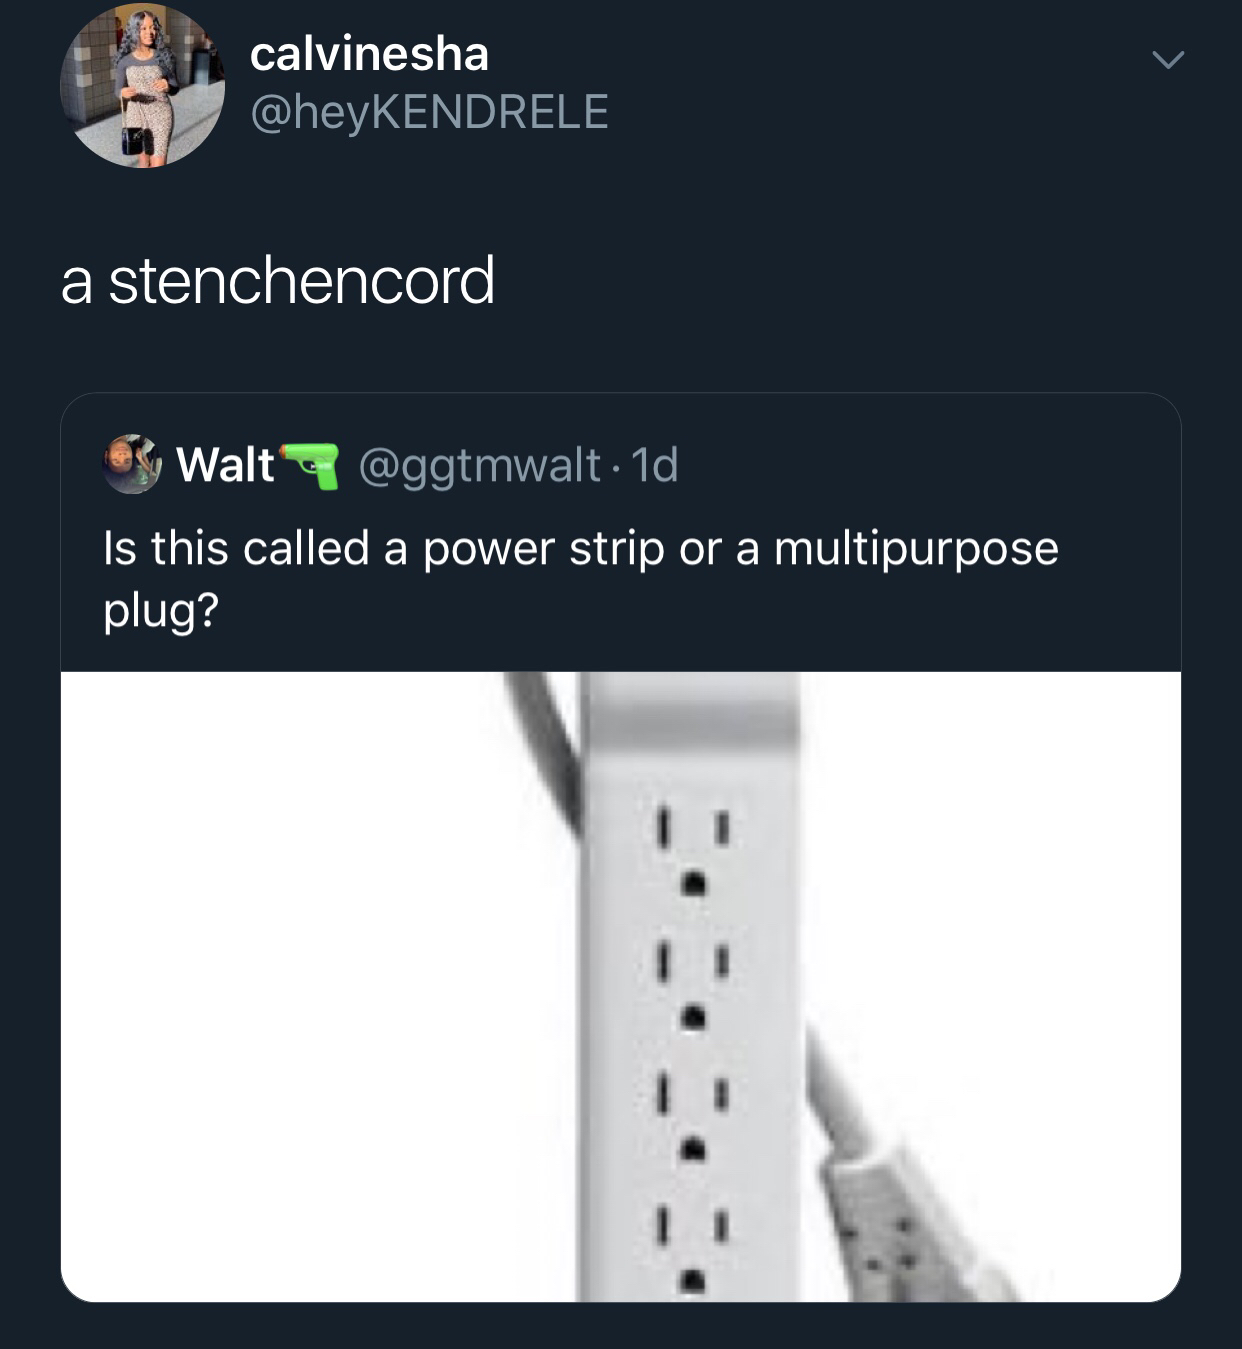 Is this called a power strip or a multipurpose plug?